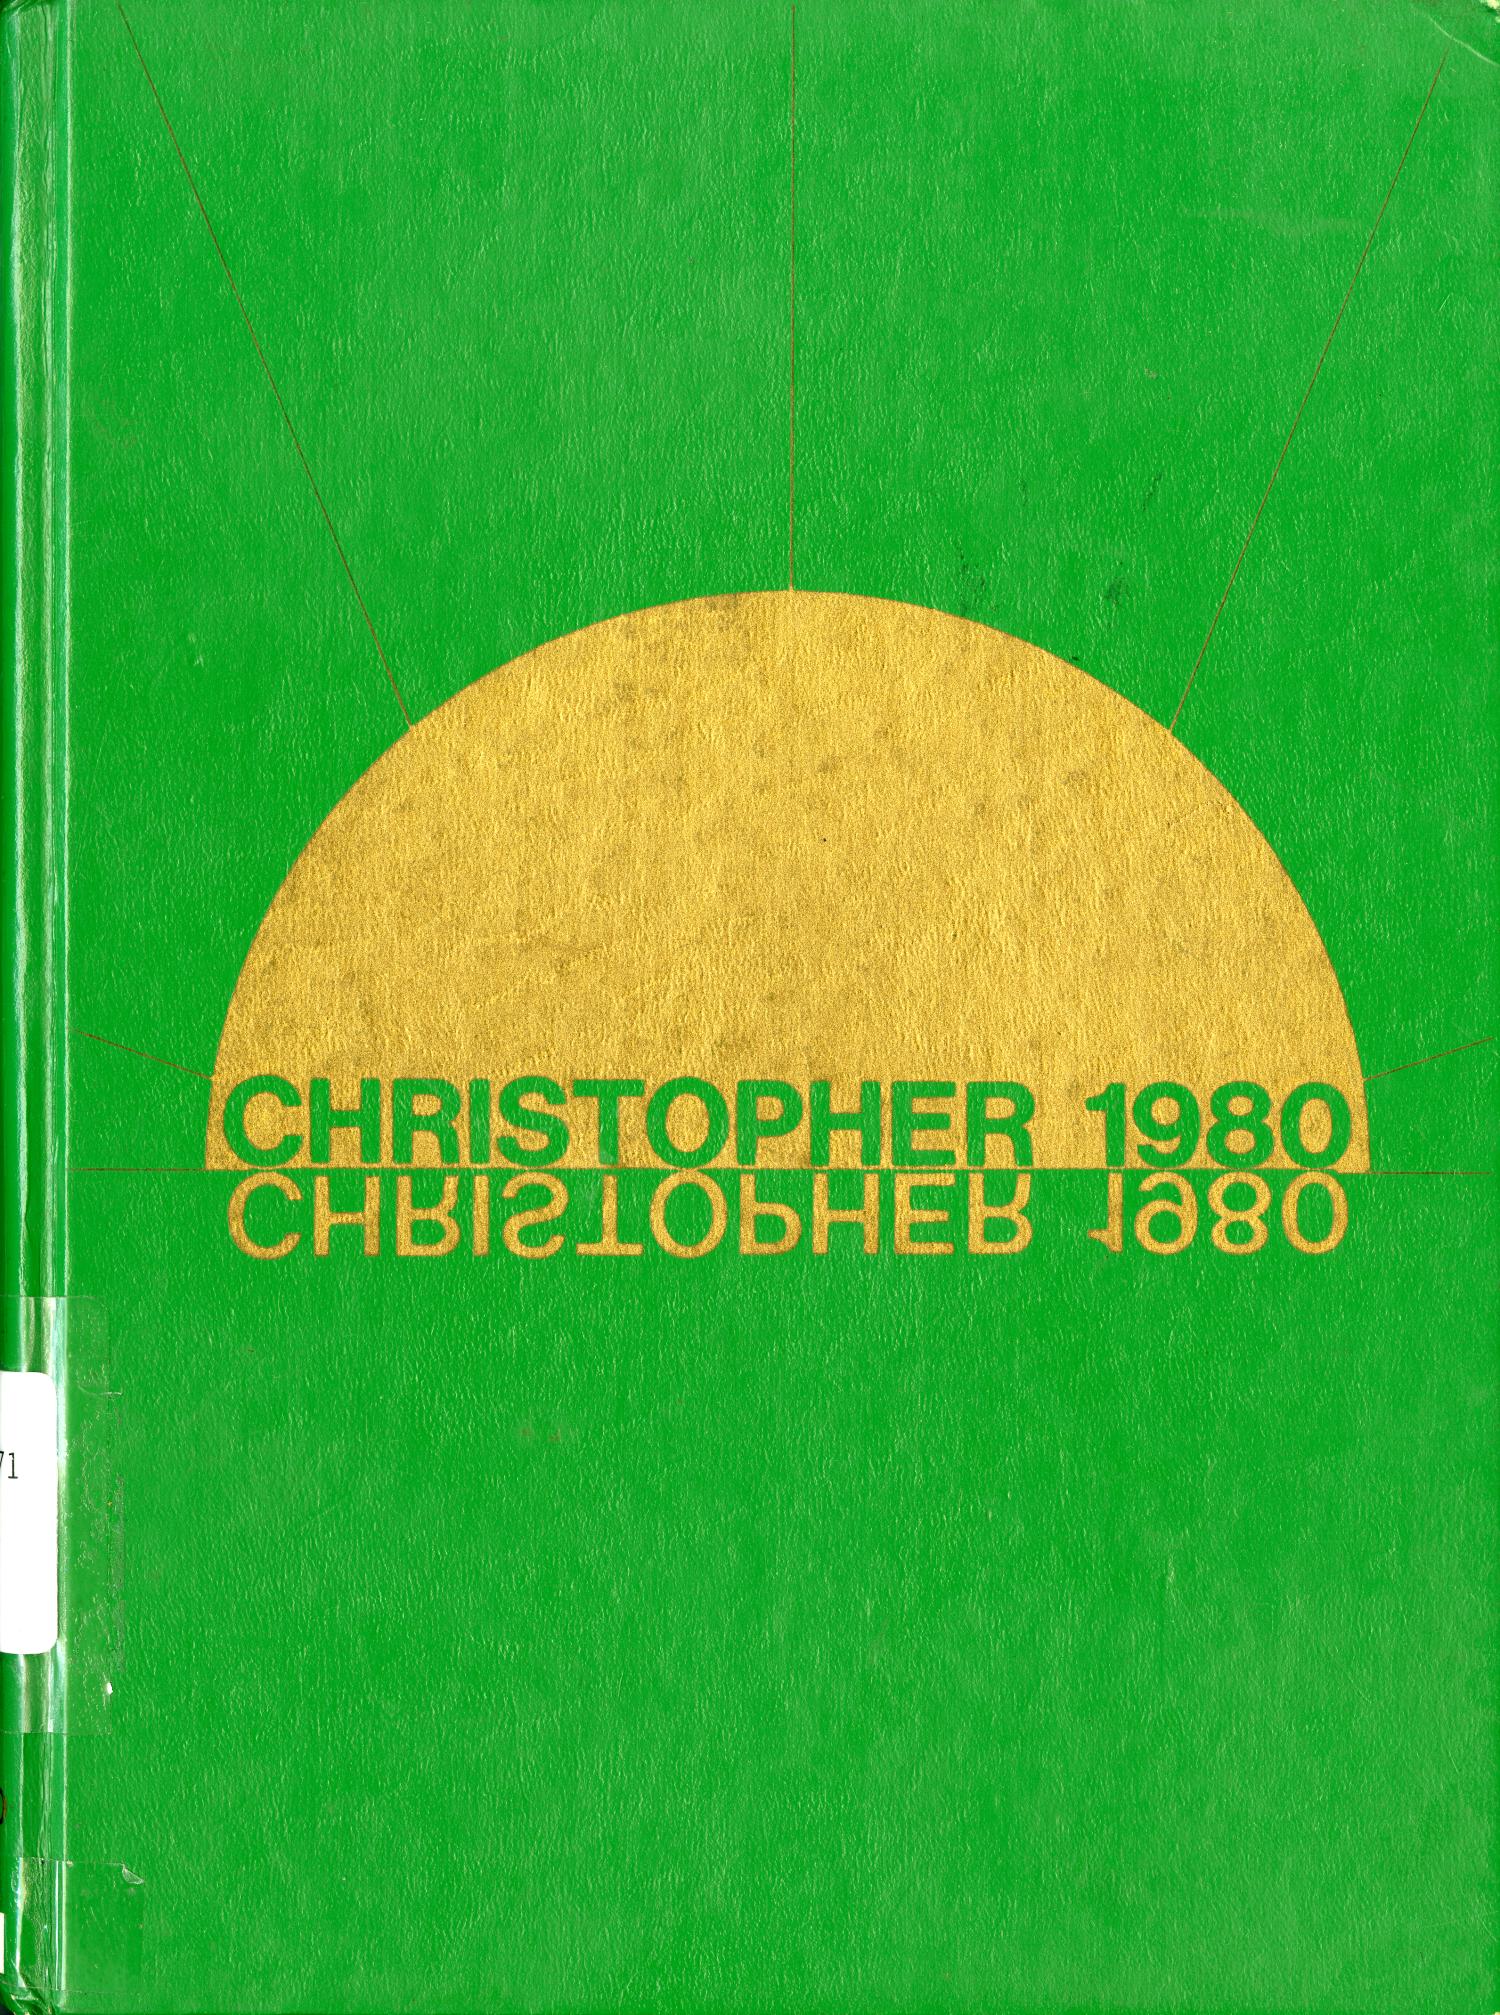 The Christopher, Yearbook of Bishop Byrne High School, 1980
                                                
                                                    Front Cover
                                                